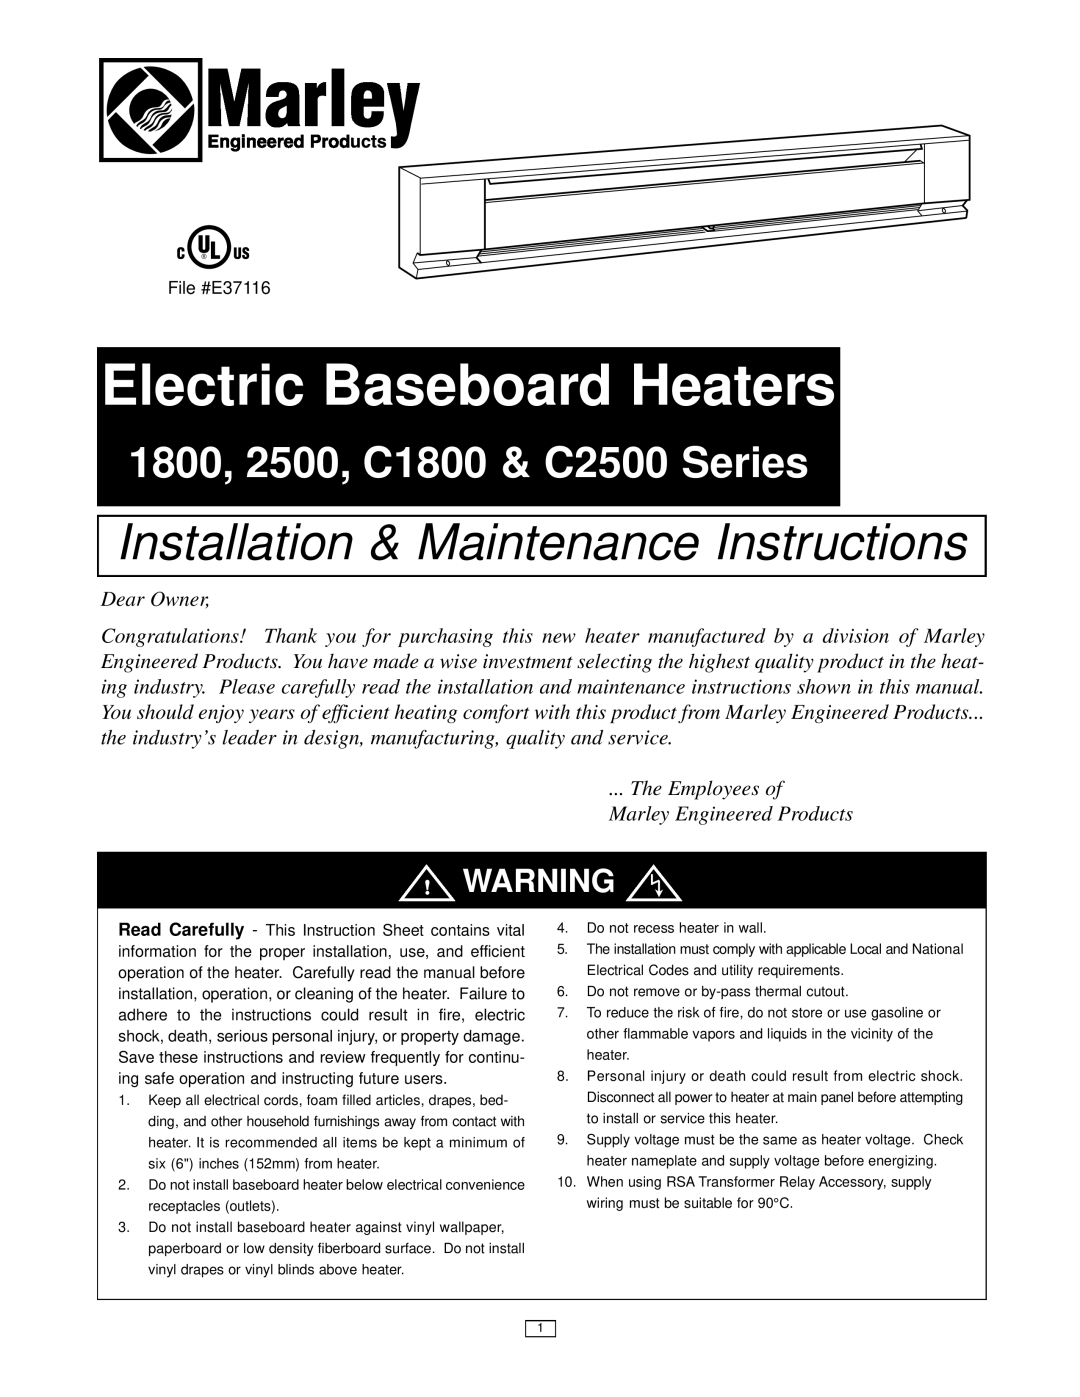 Marley Engineered Products C2500 instruction sheet Electric Baseboard Heaters, Installation & Maintenance Instructions 